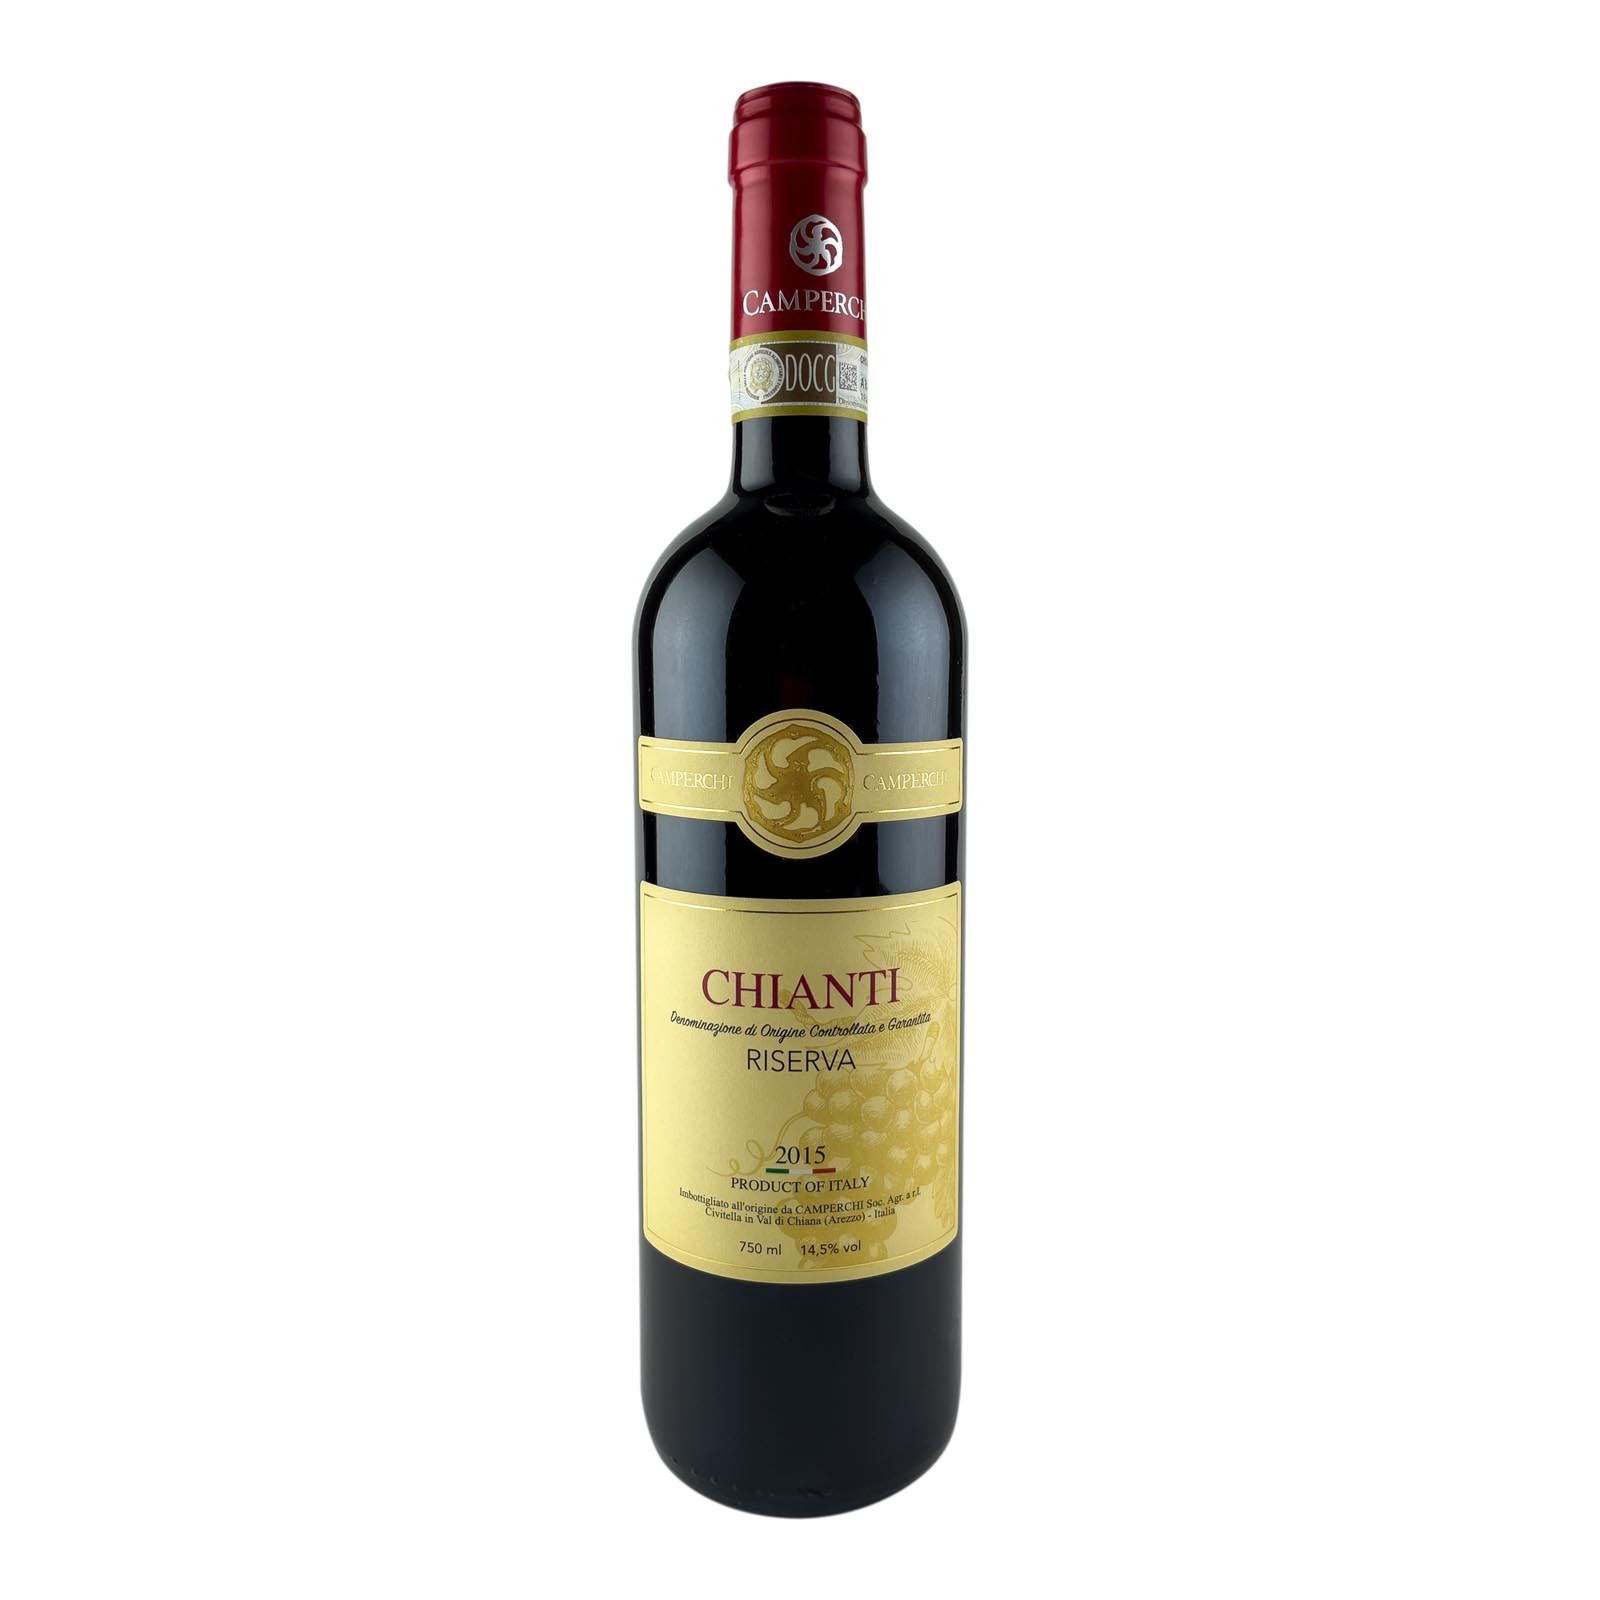 “Chianti Riserva” of the Prima Selezione line of Camperchi is a classic red wine that interprets the Tuscan tradition in perfect synthesis with innovation and modern technologies.